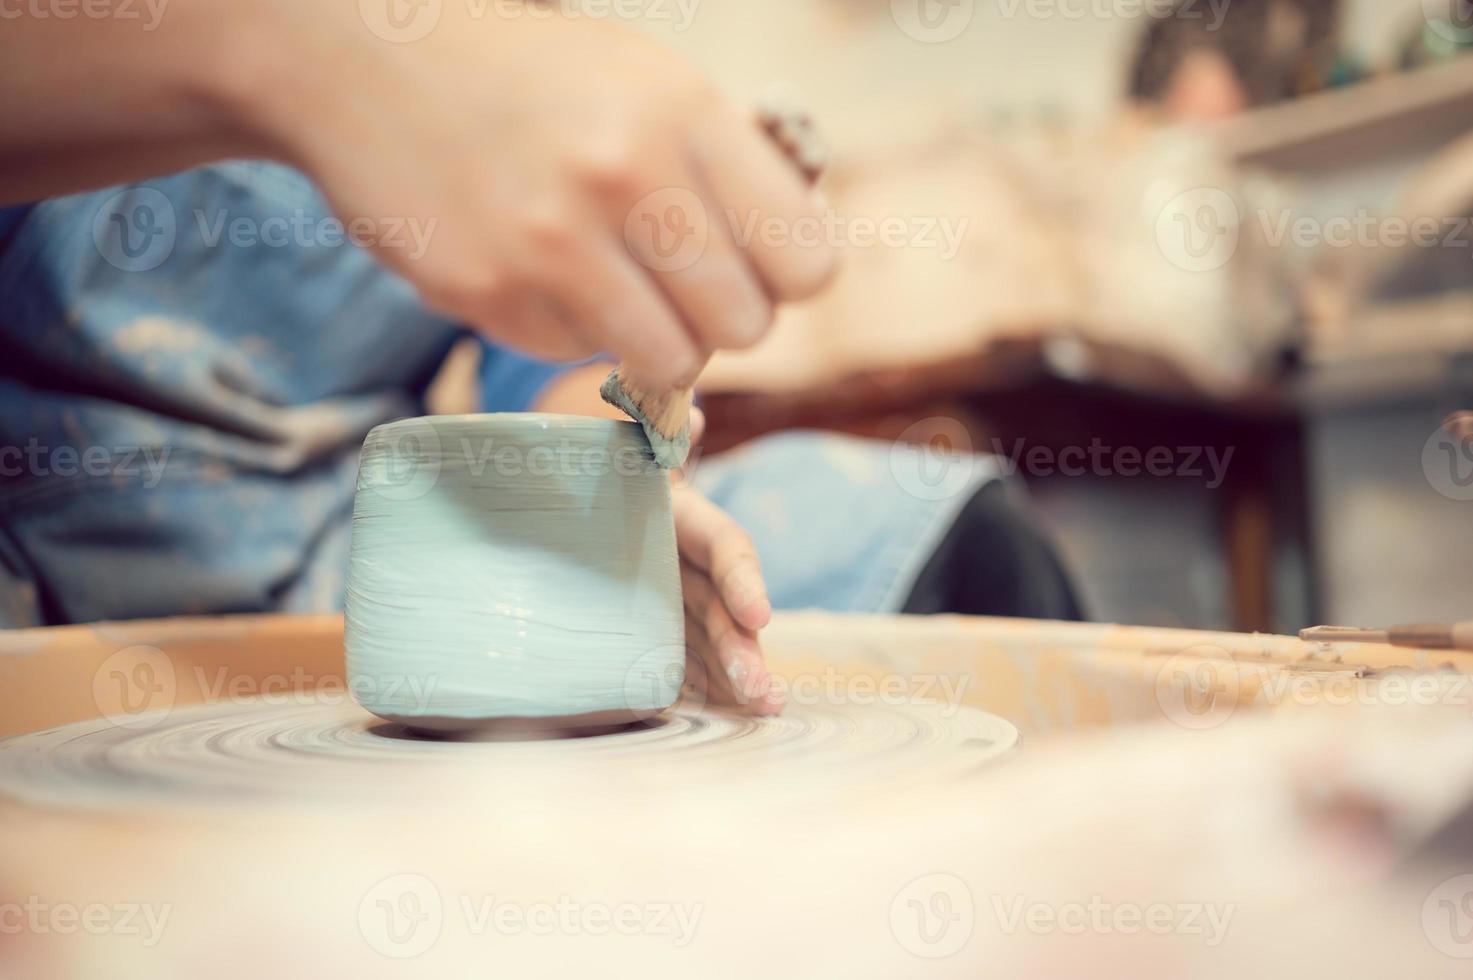 Painting the sculpture is one of the artist pottery processes. photo